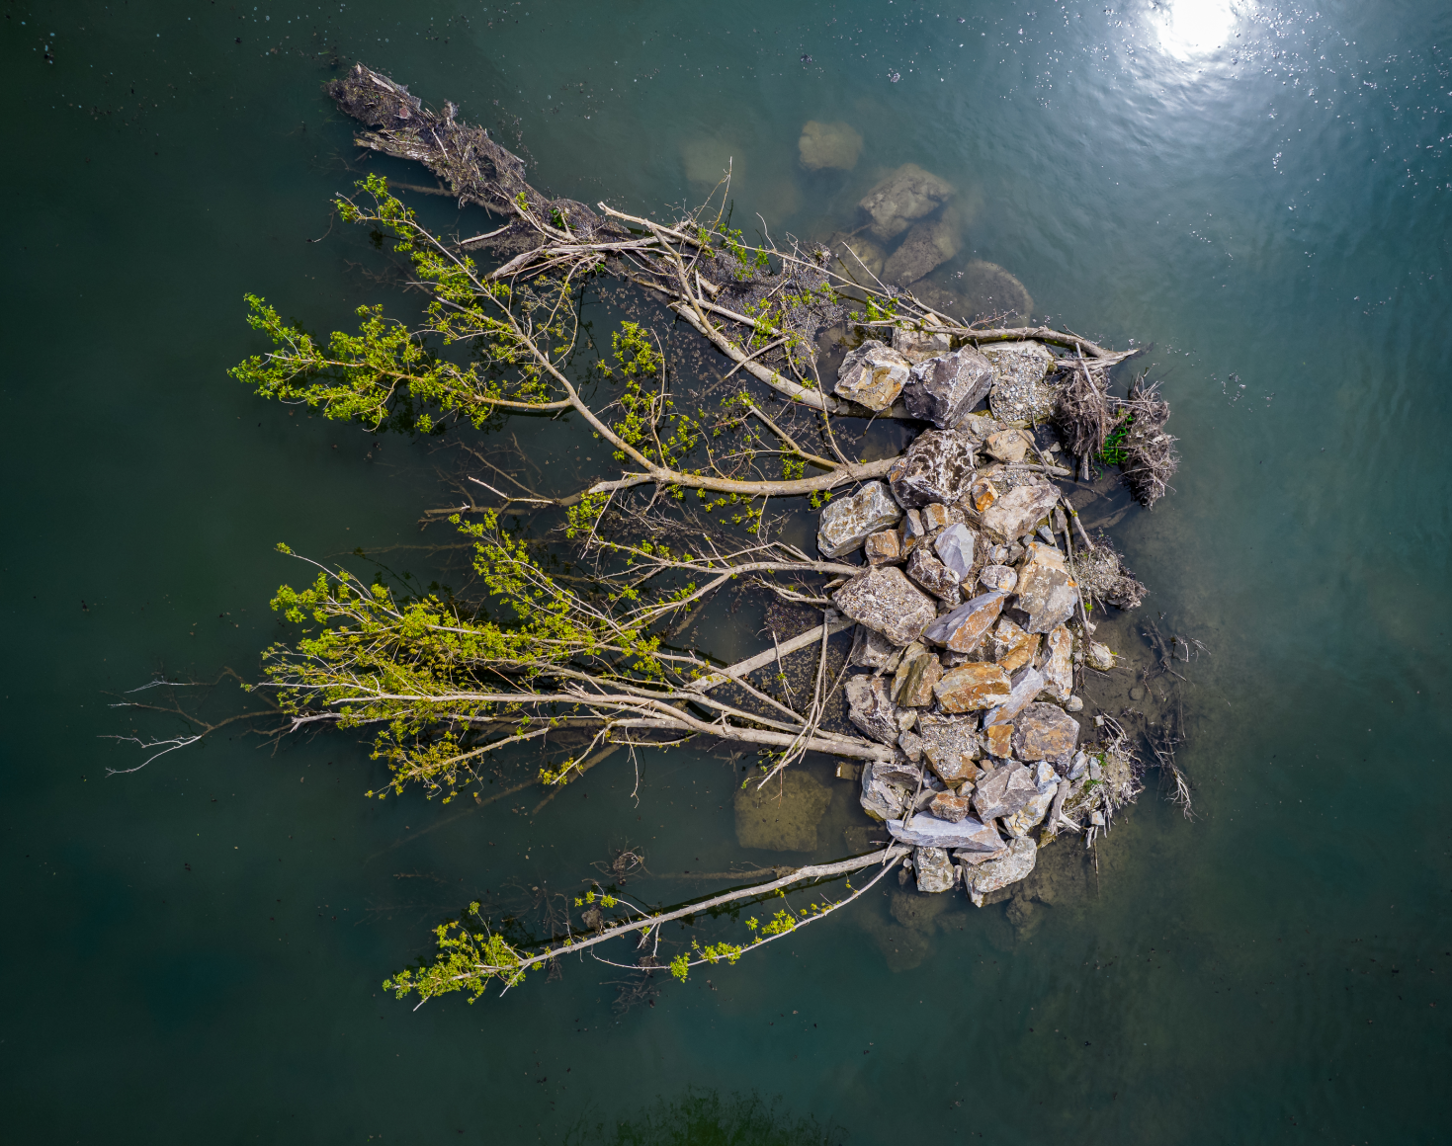 A current breaker can be seen in the Altenwörth fish migration aid, consisting of large rocks and stones as well as green plants. The current breaker serves as a nesting place for living creatures and is therefore placed in the centre of the dark blue water to break the current properly.